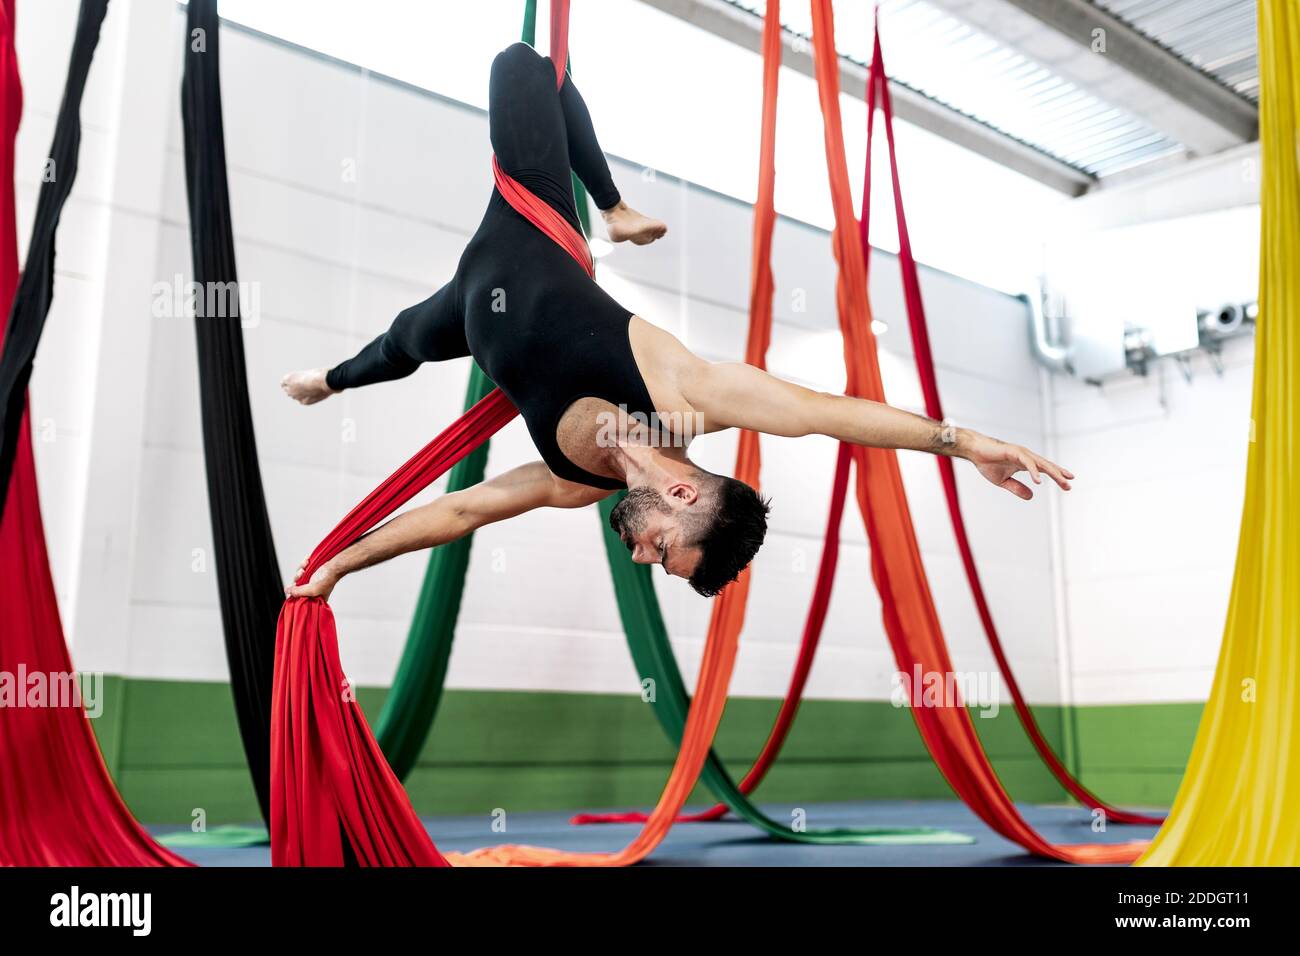 Bearded adult dancer in black leotard hanging upside down on aerial silk during rehearsal in studio Stock Photo